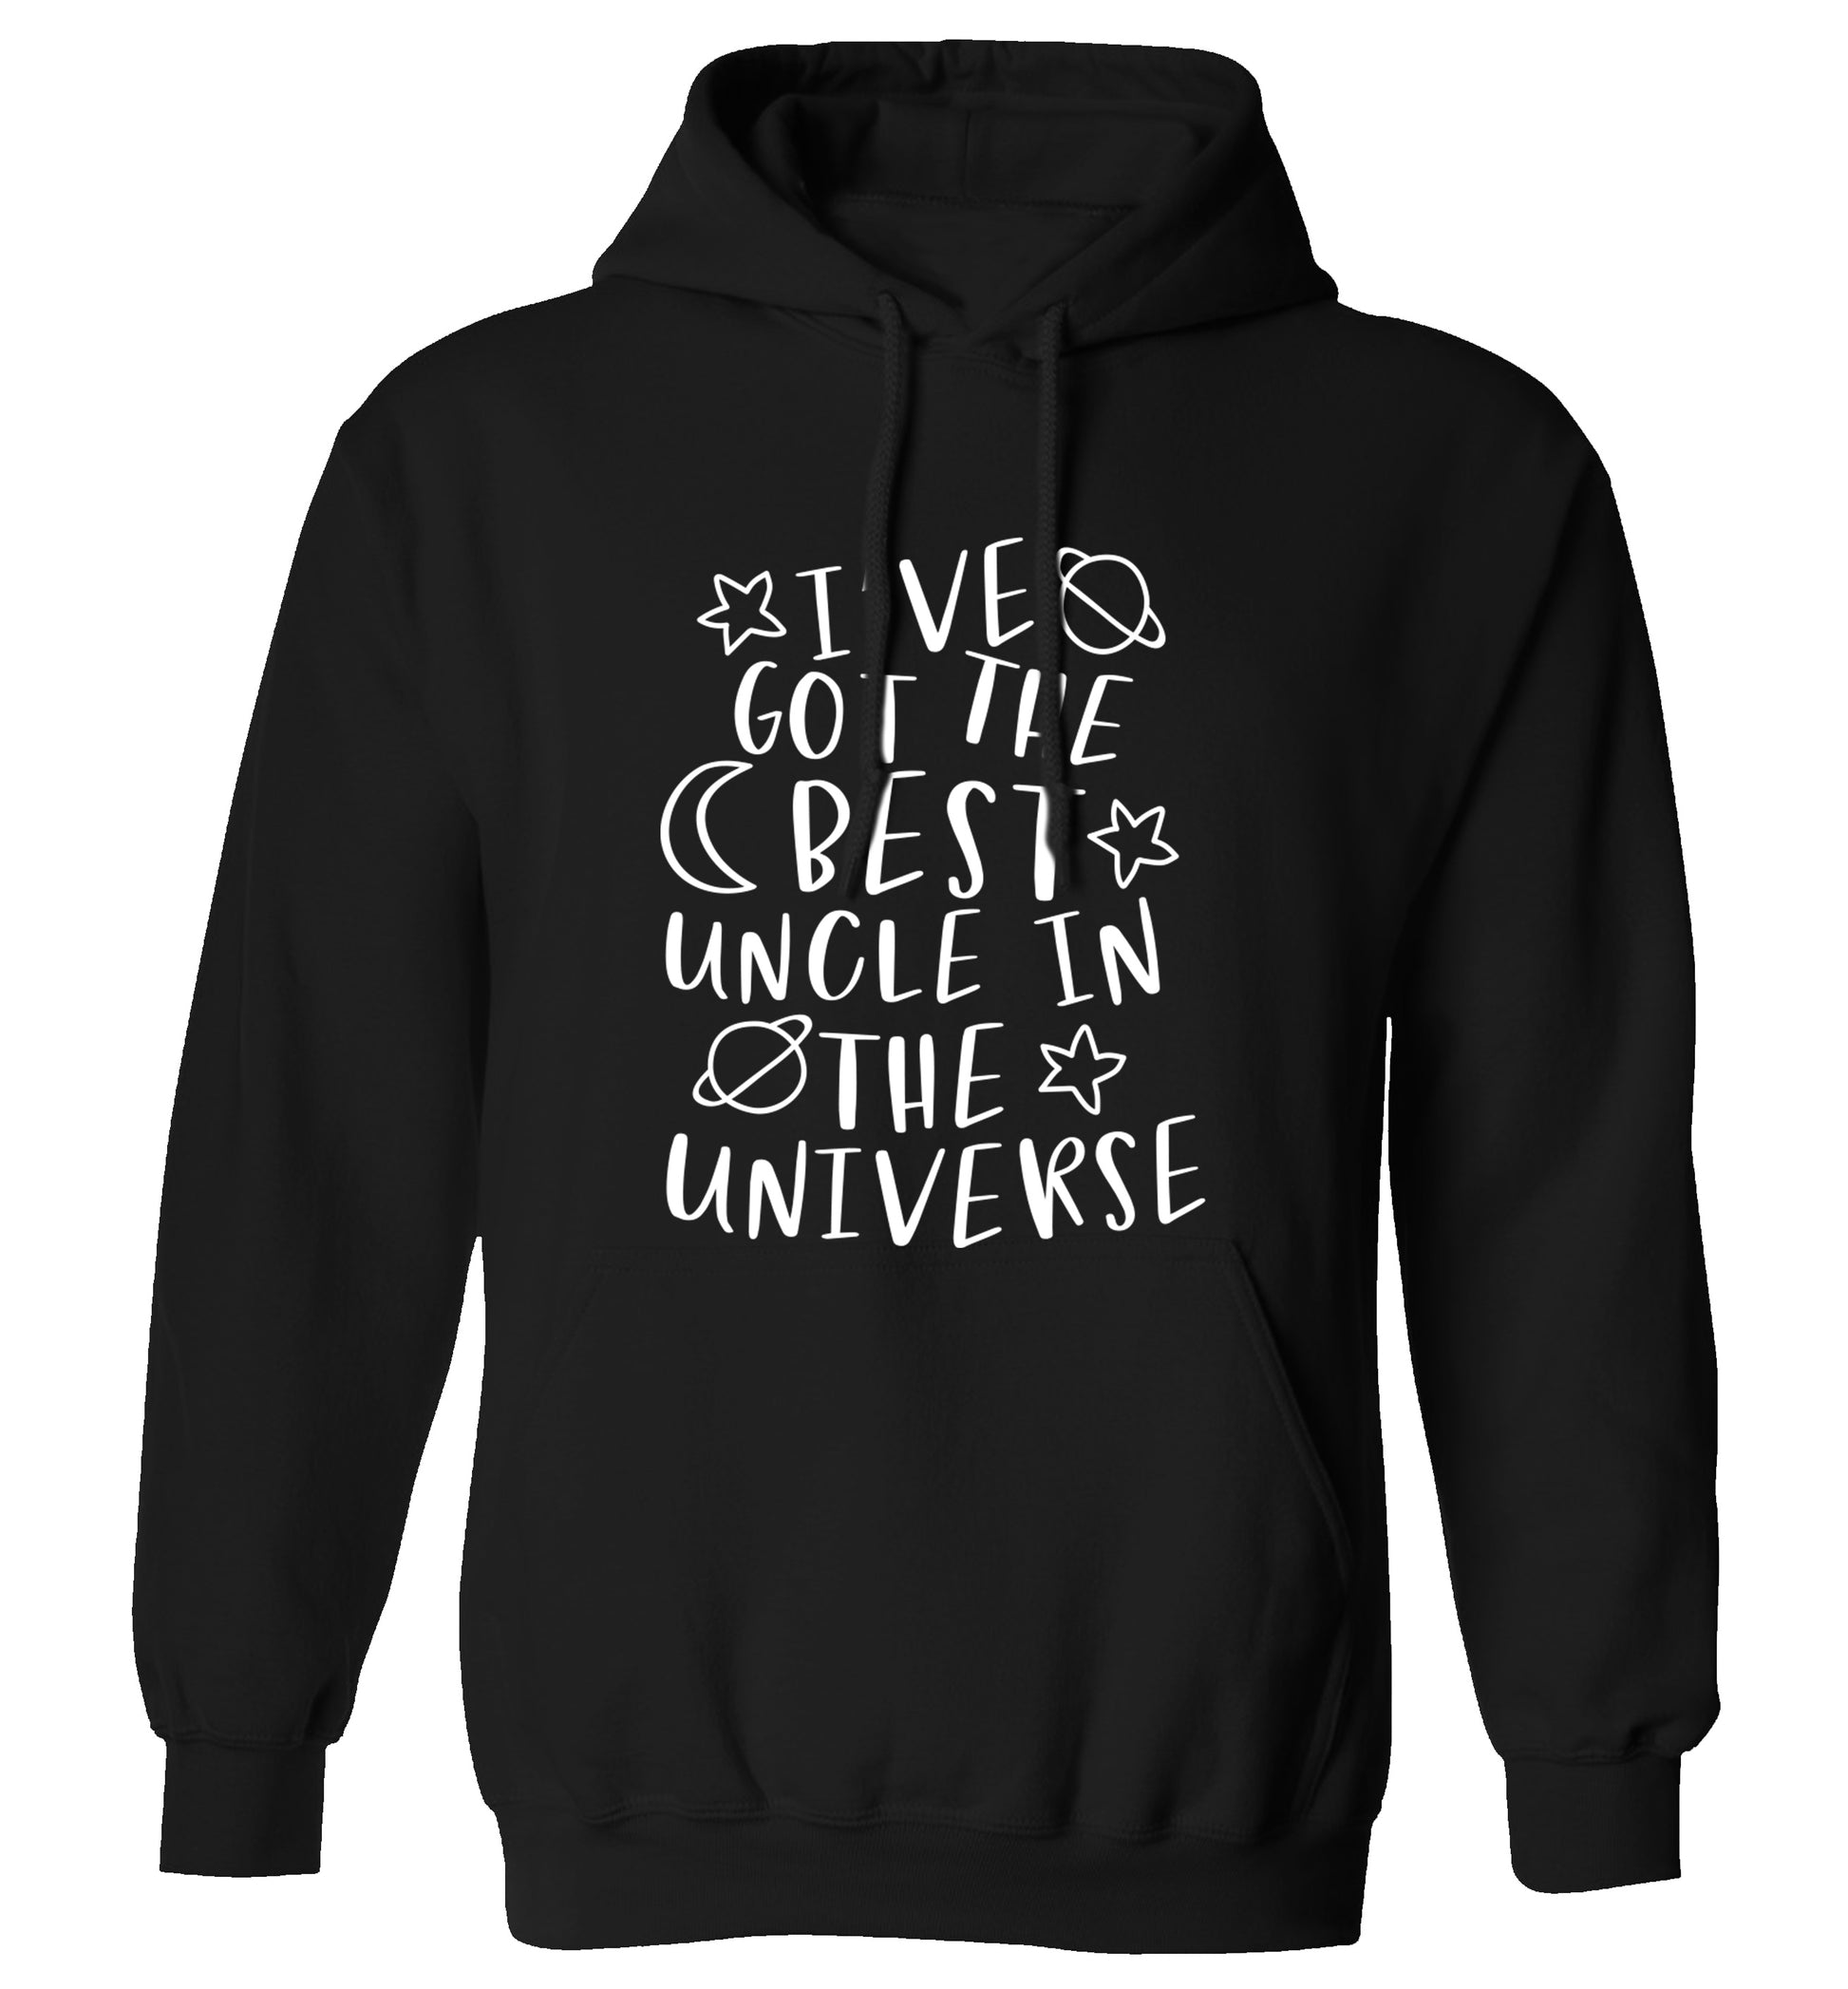 I've got the best uncle in the universe adults unisex black hoodie 2XL